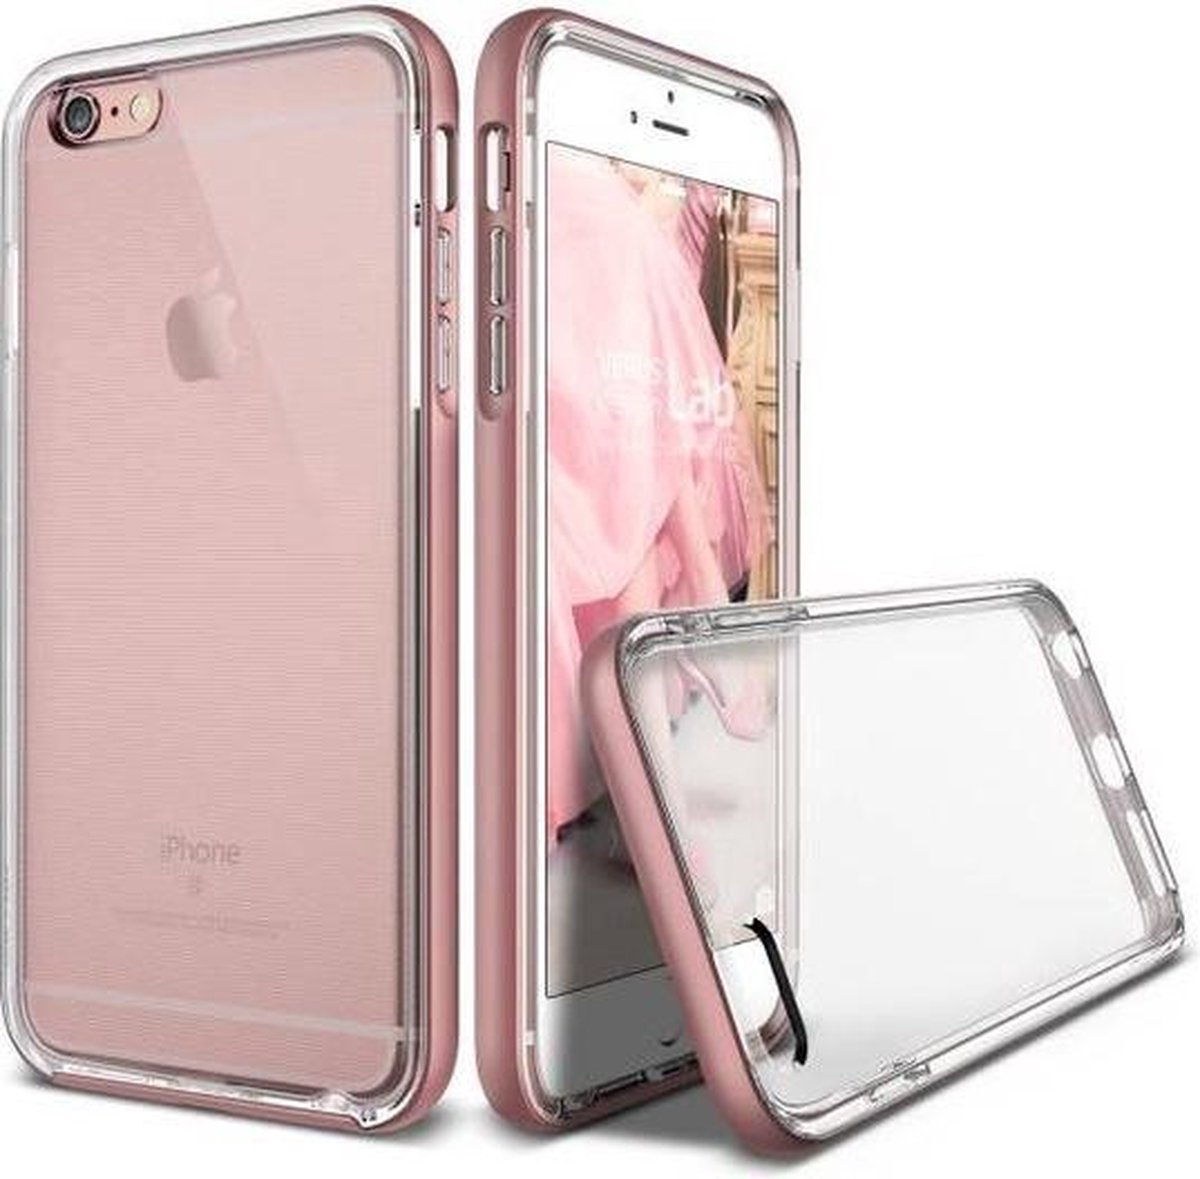 SMH Royal - Geschikt voor Apple iPhone 6/ 6S Silicone Transparant Hoesje / Case / Cover Met Roze Bumper, Schokabsorberend, Easy Fit, Protection